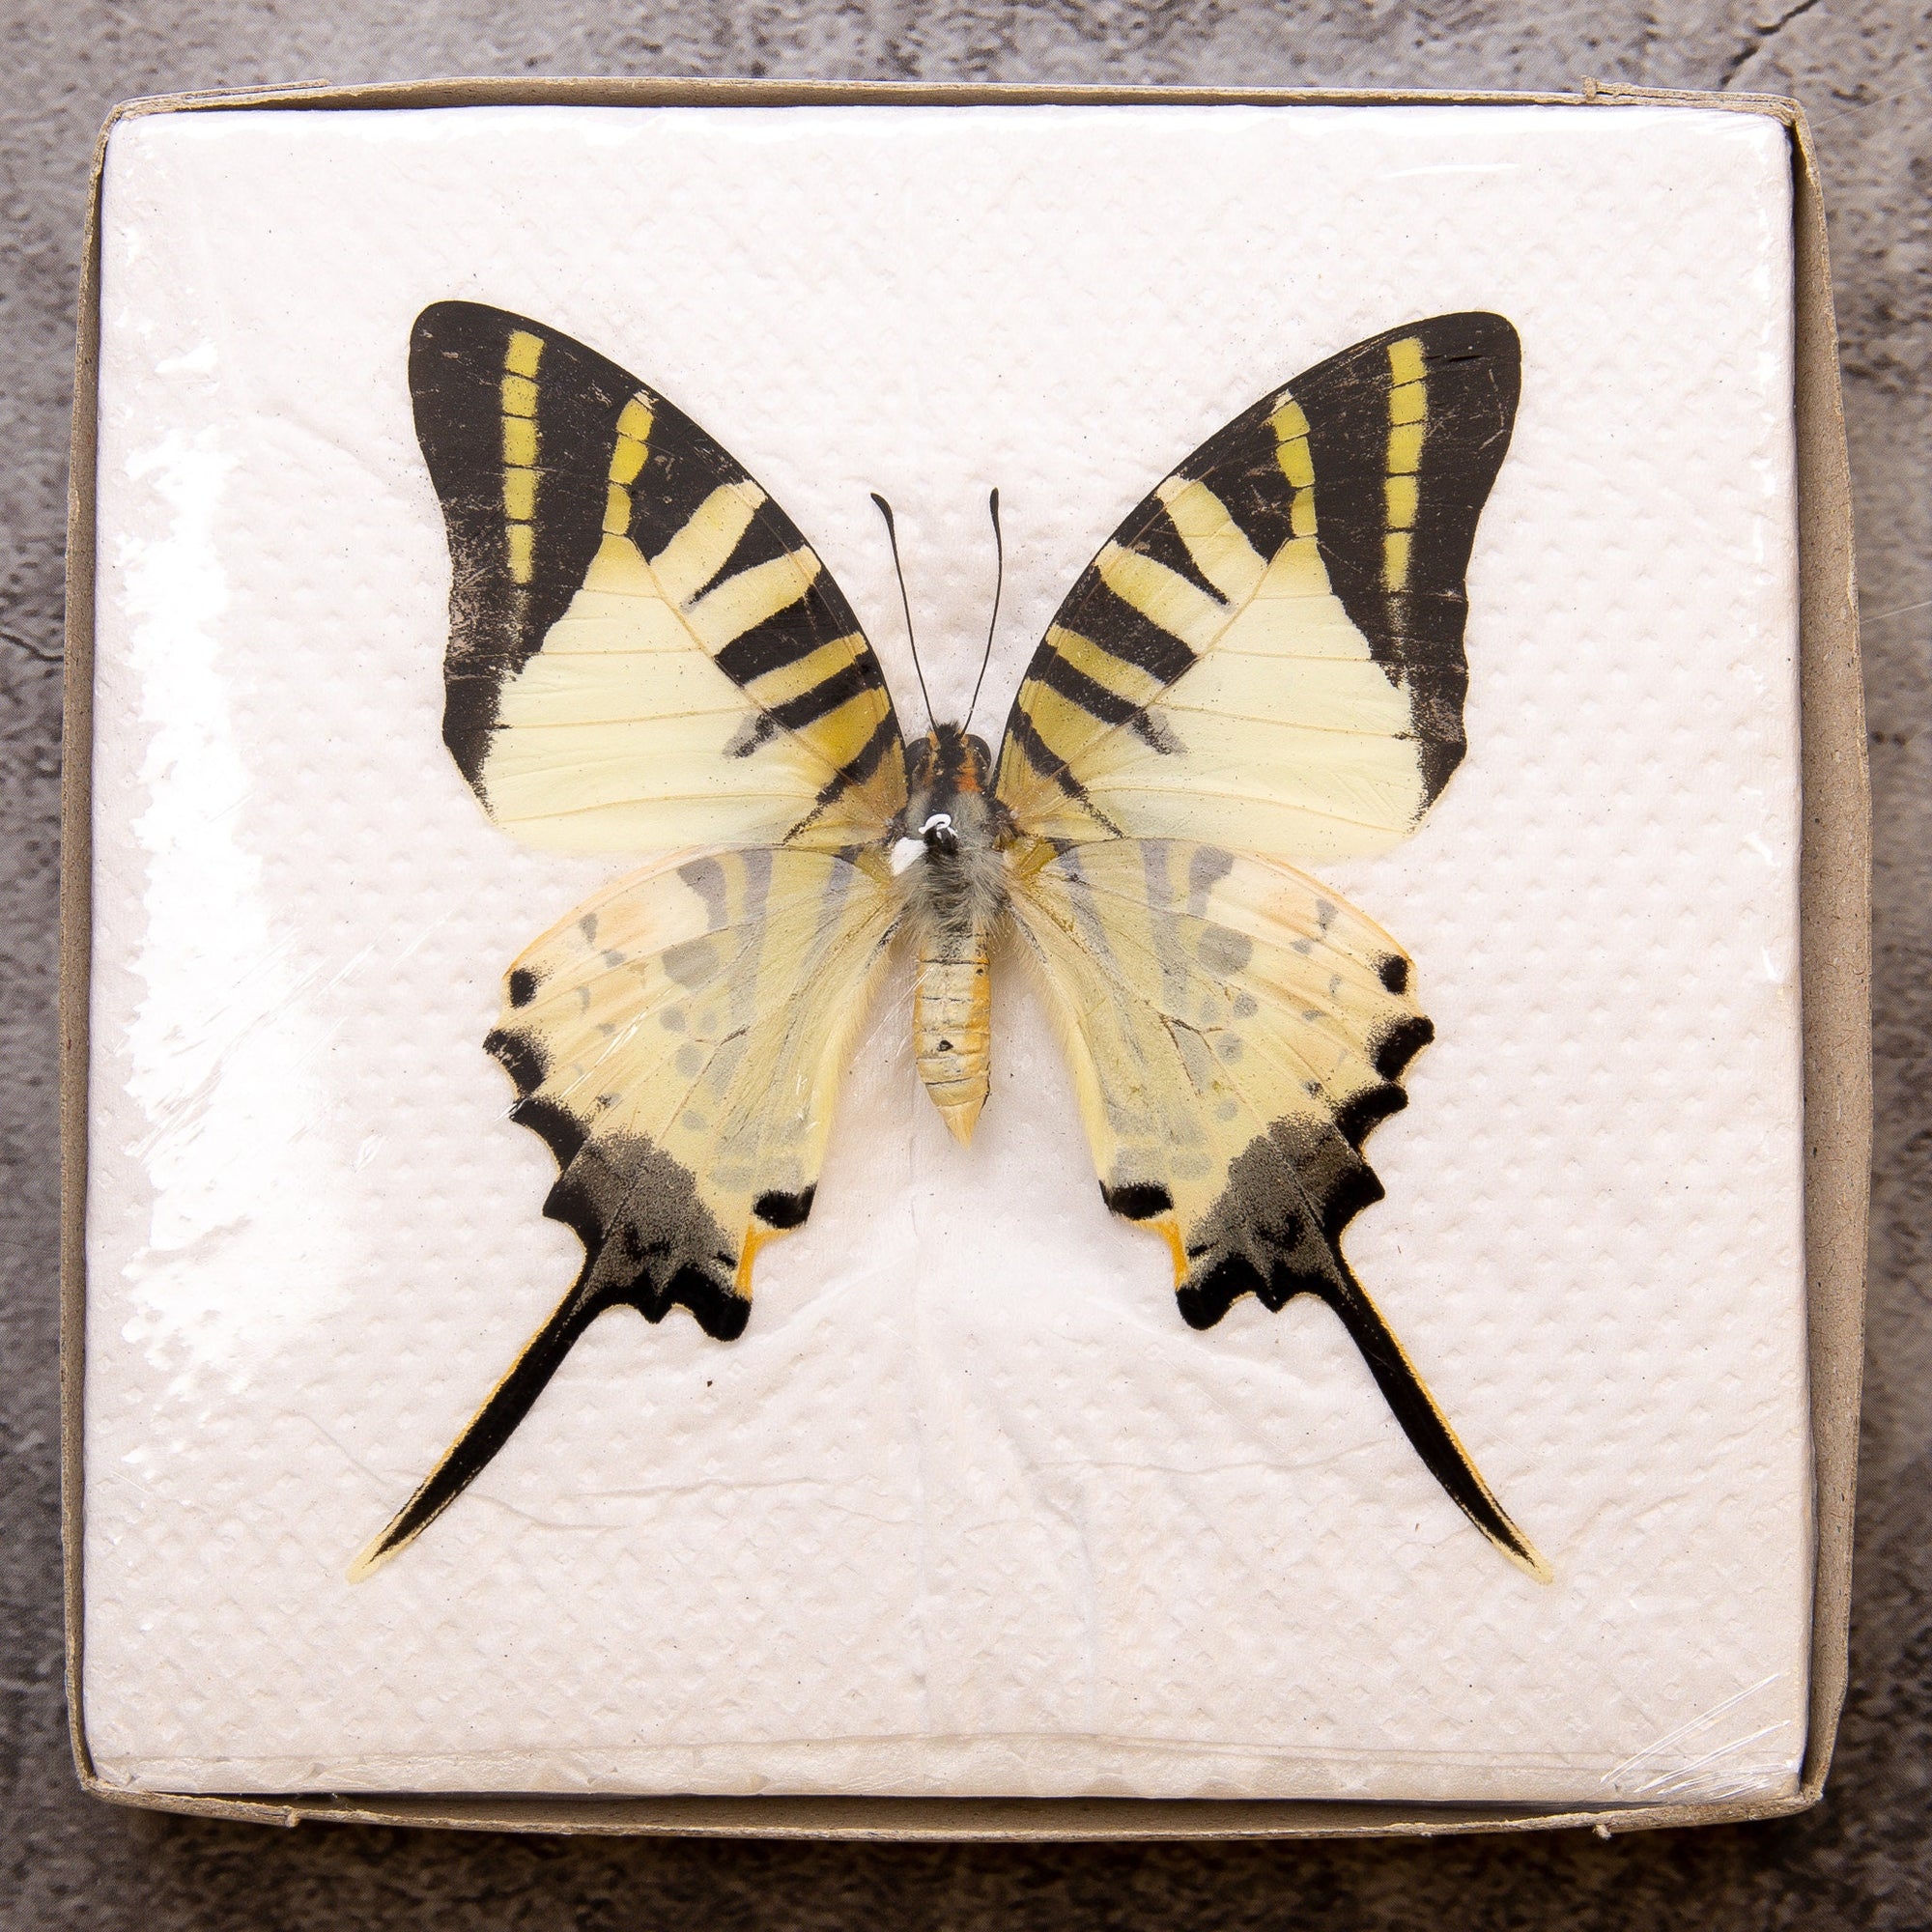 Pack of 2 Five-bar Swordtail Butterflies (Graphium antiphates) WINGS-SPREAD, Ethically Sourced Preserved Specimens for Collecting & Art